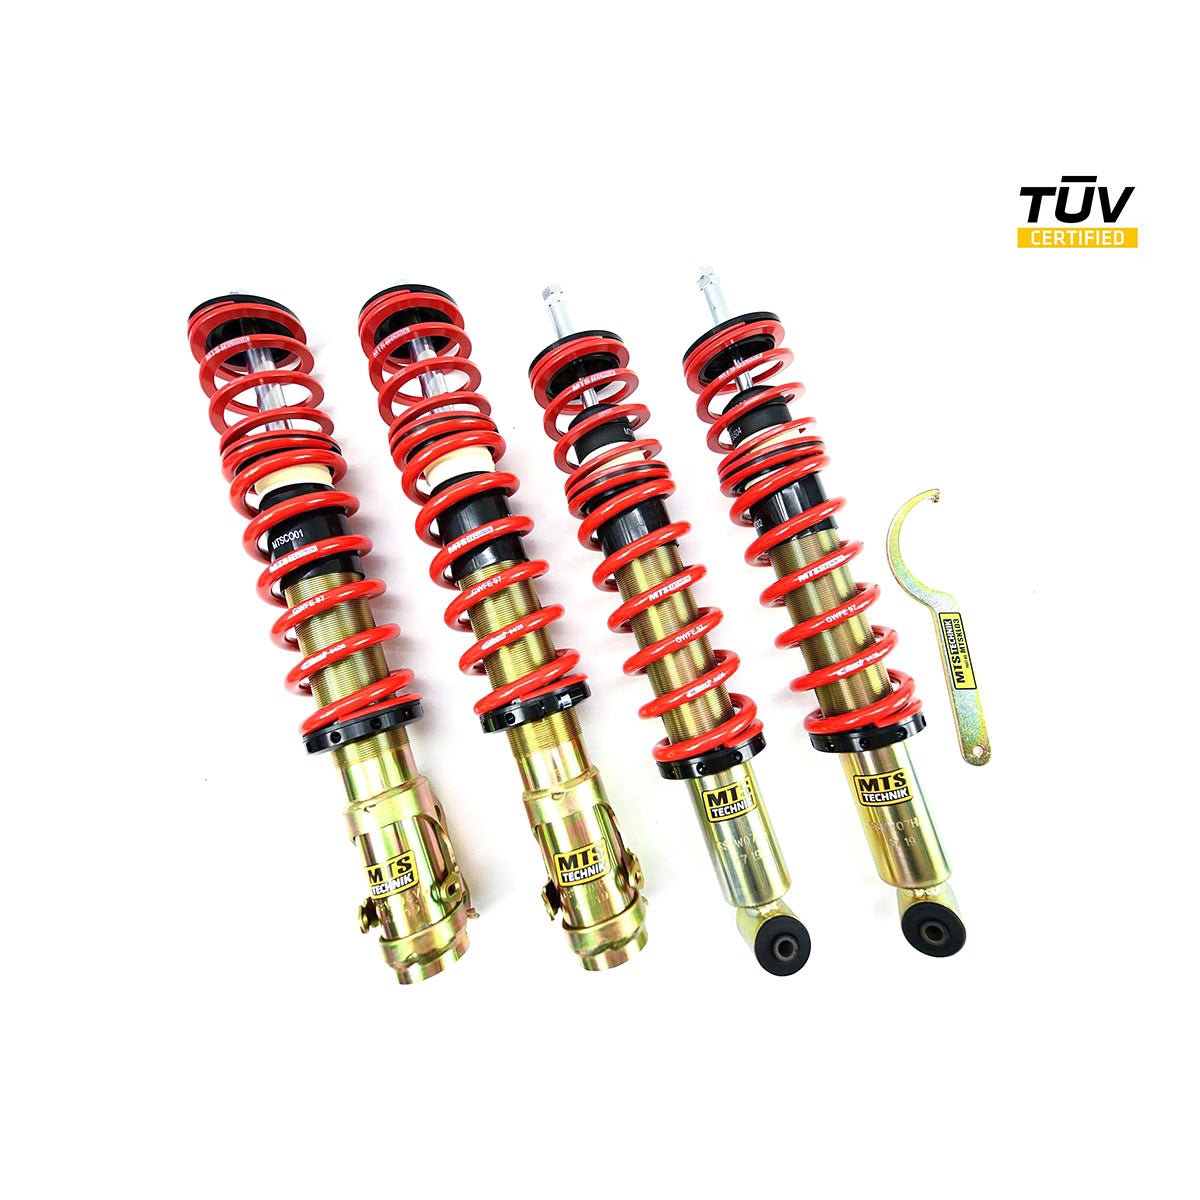 MTS TECHNIK coilover kit STREET VW Golf 2 (with TÜV) - PARTS33 GmbH